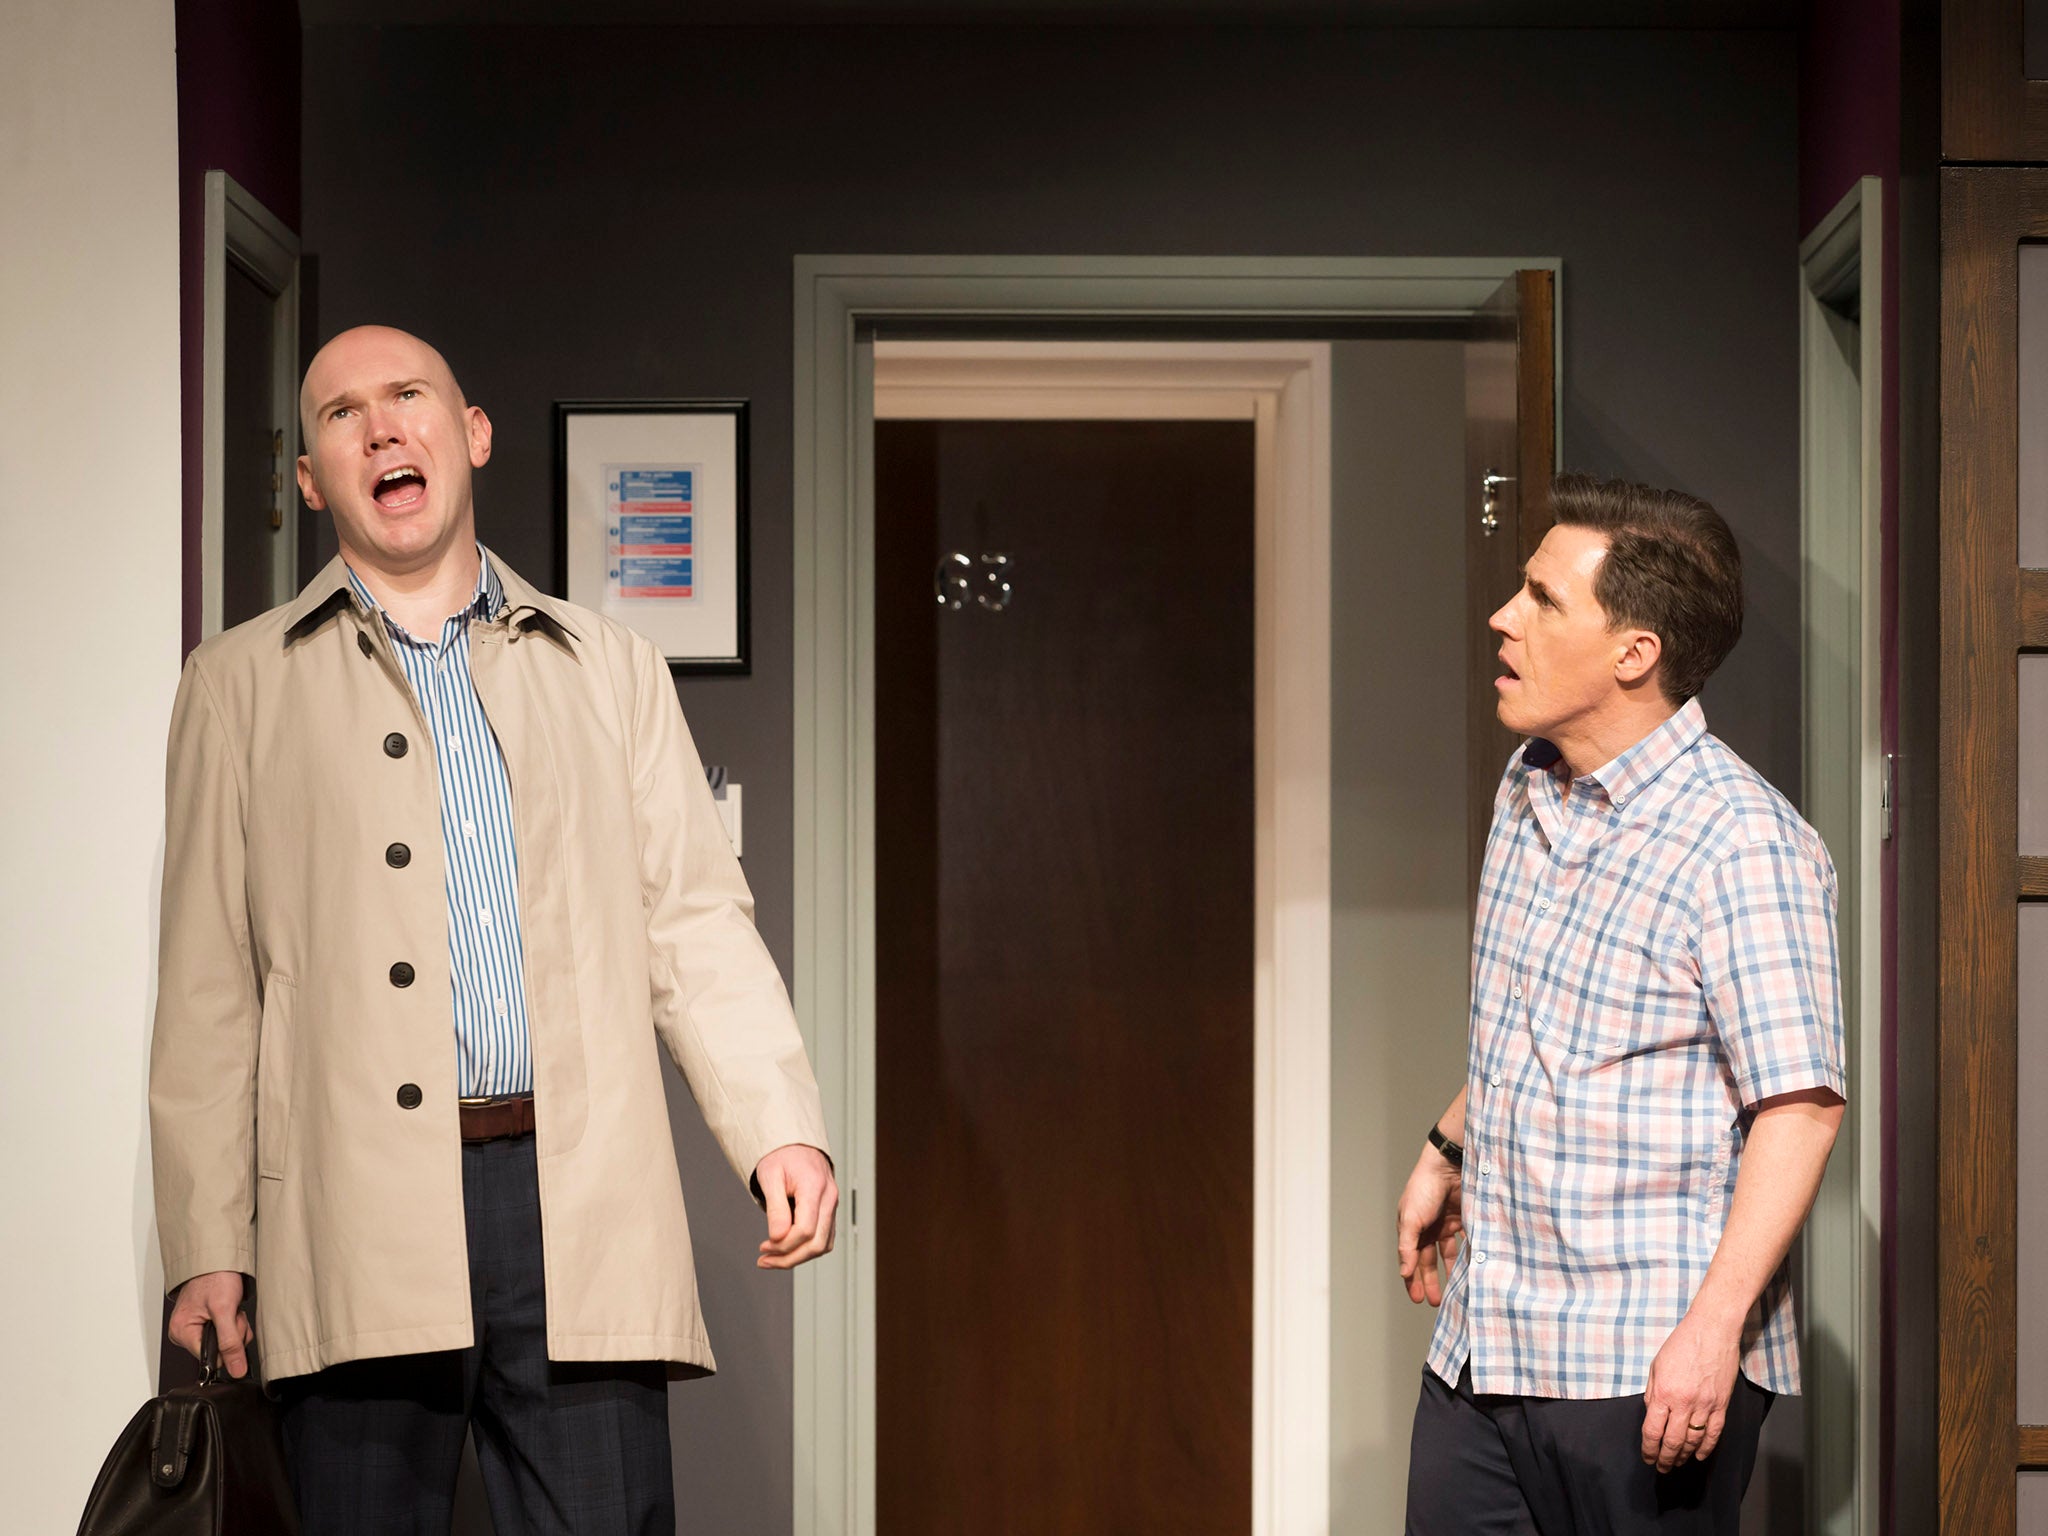 The Painkiller (Kenneth Branagh Theatre Company) Alex Macqueen (Dent), Rob Brydon (Dudley).